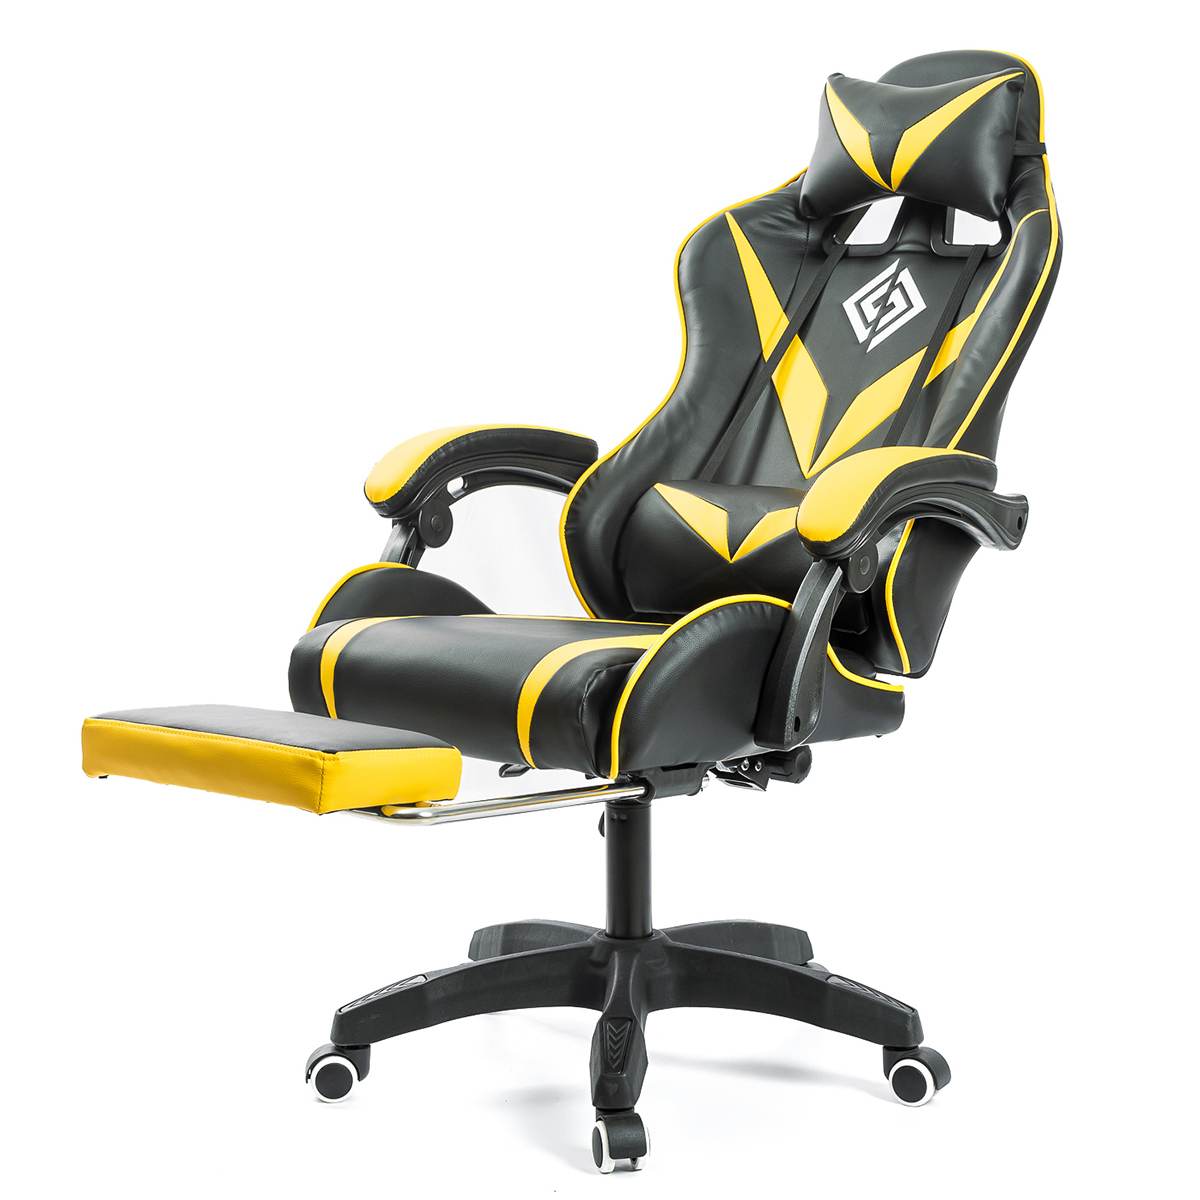 Professional Gaming Chair